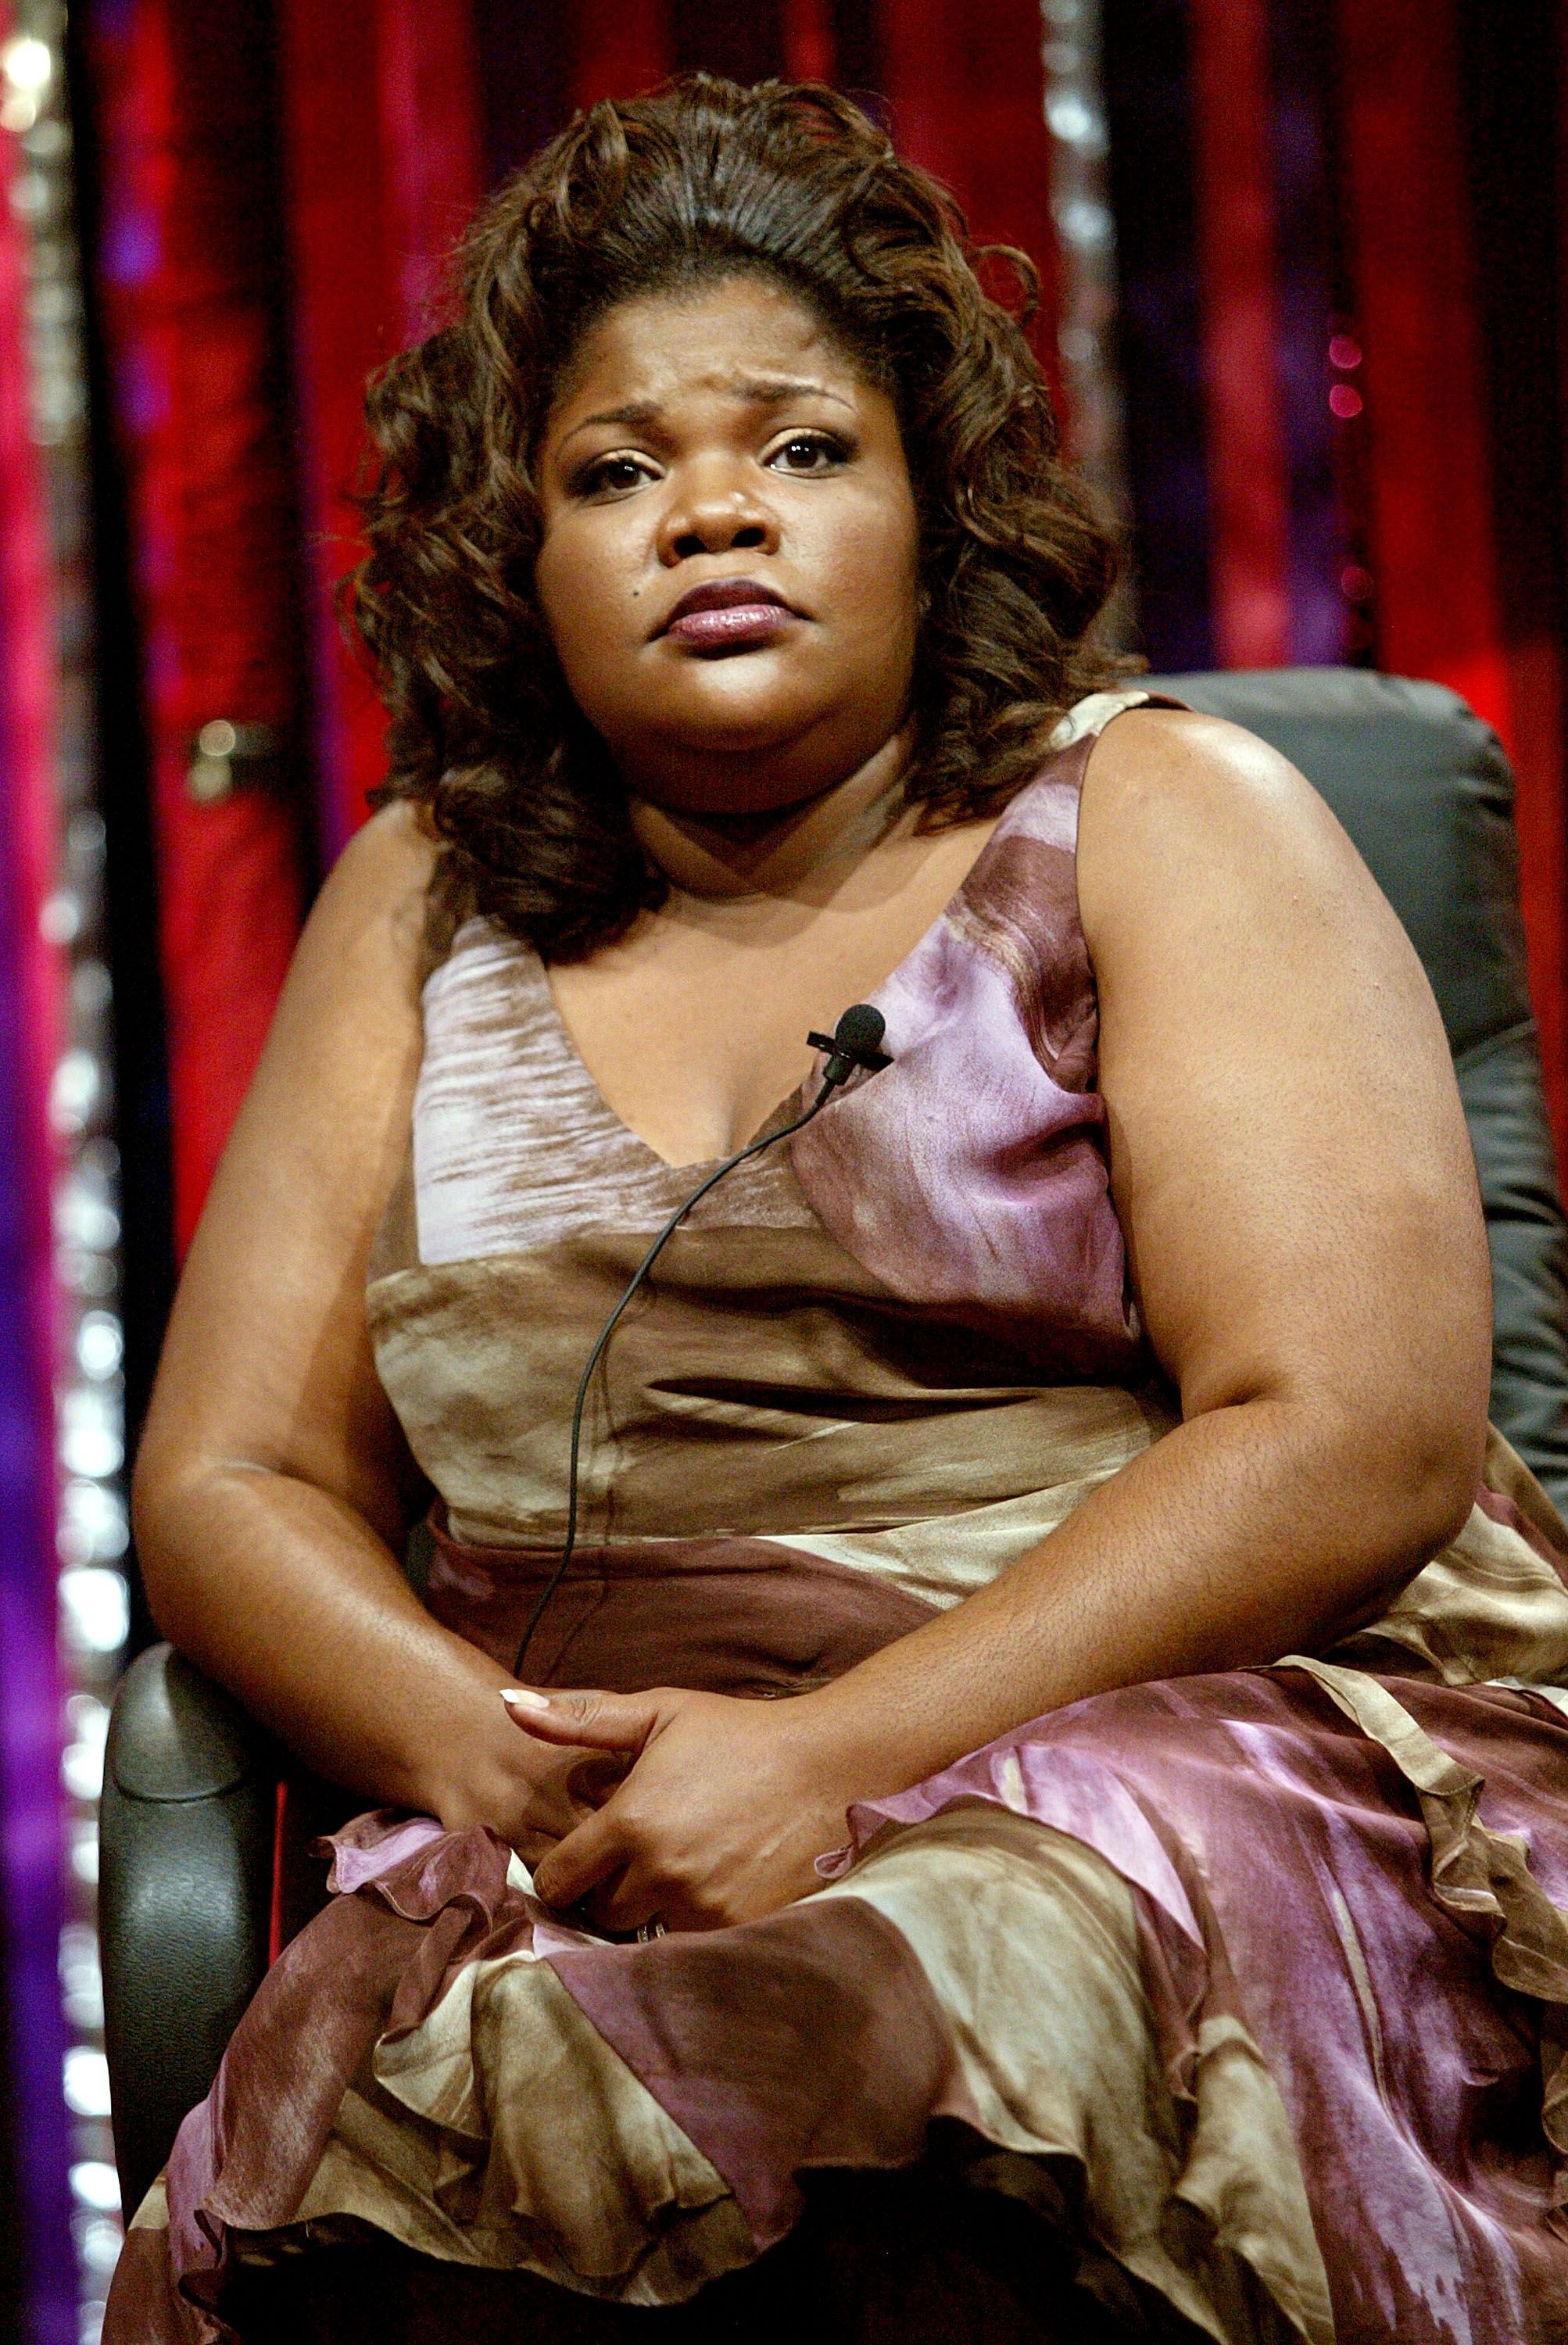  Mo'Nique attends the discussion panel for "Mo'Nique's Fat Chance" during the Oxygen 2005 Television Critics Association Summer Press Tour. | Source: Getty Images